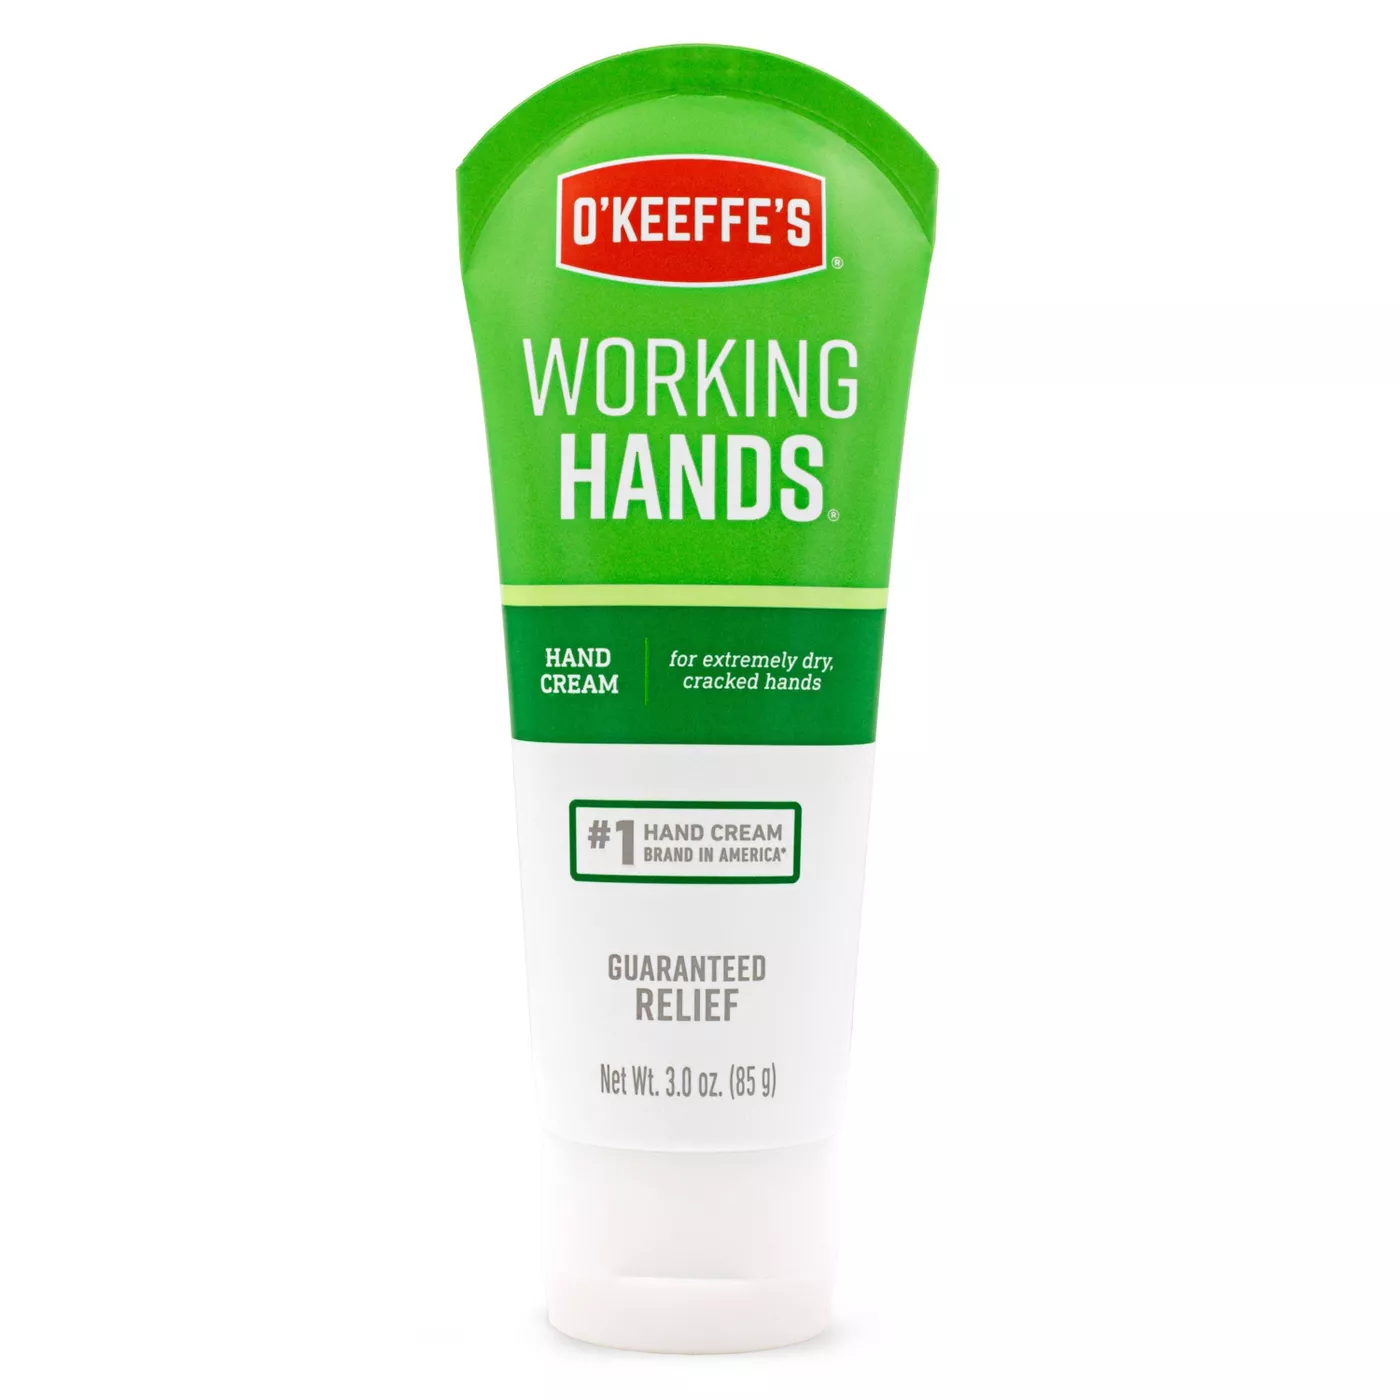 O'Keeffe's Working Hands Hand Cream 3oz - image 1 of 6